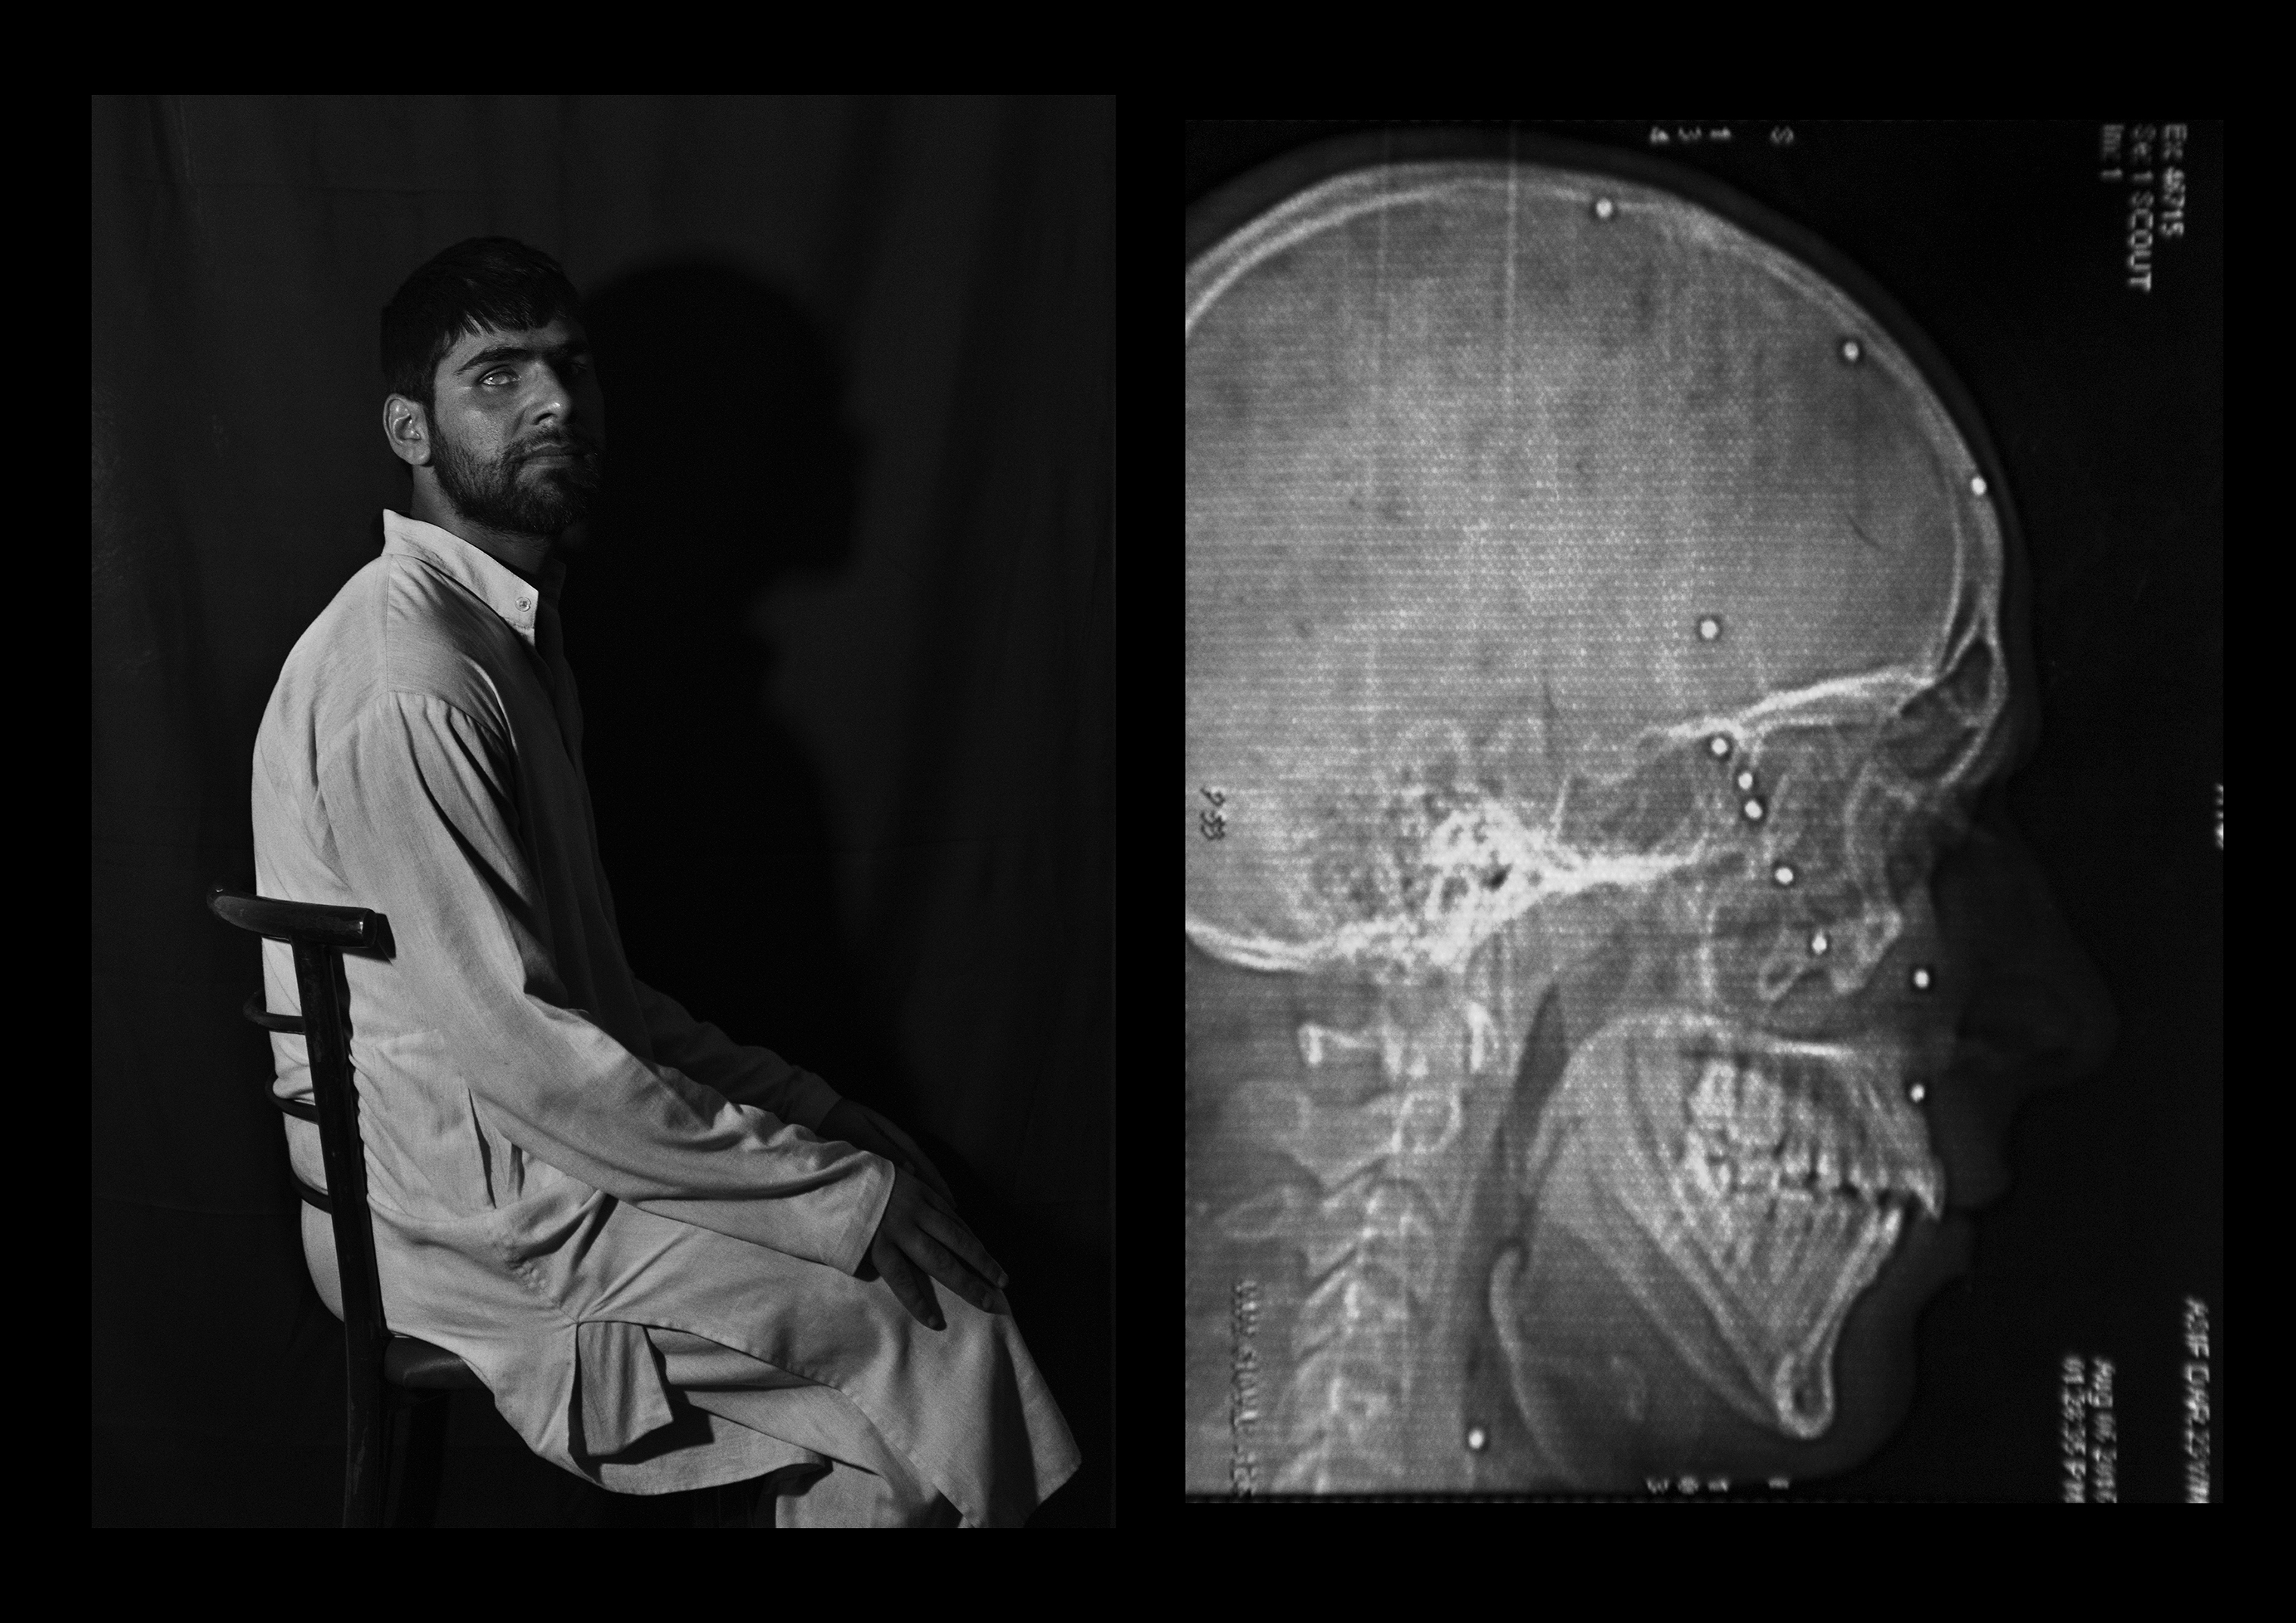 Mohammad Asif Dar, 23 years old, from Baramulla. He says he was playing cricket when he was shot in the head, shoulder and chest. Despite eight surgeries, he only has 10% of his vision left in his right eye. (Camillo Pasquarelli)